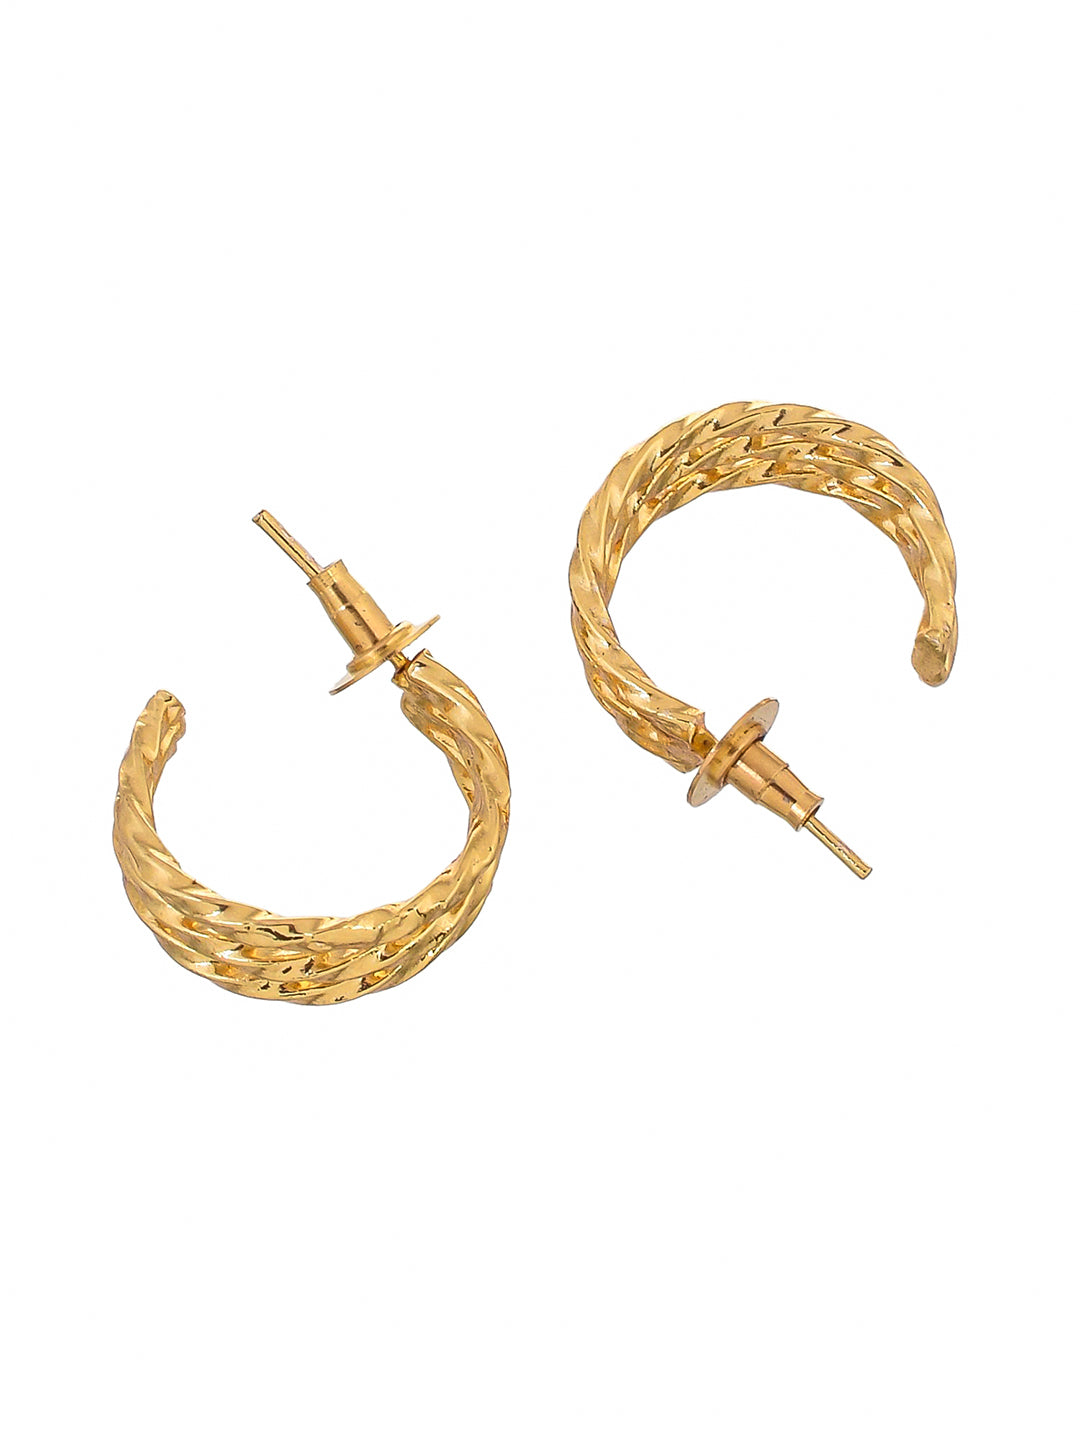 style with these stunning Gold Plated Women's Hoop Earrings. Made with expert craftsmanship and high-quality materials, these earrings will complement any outfit.